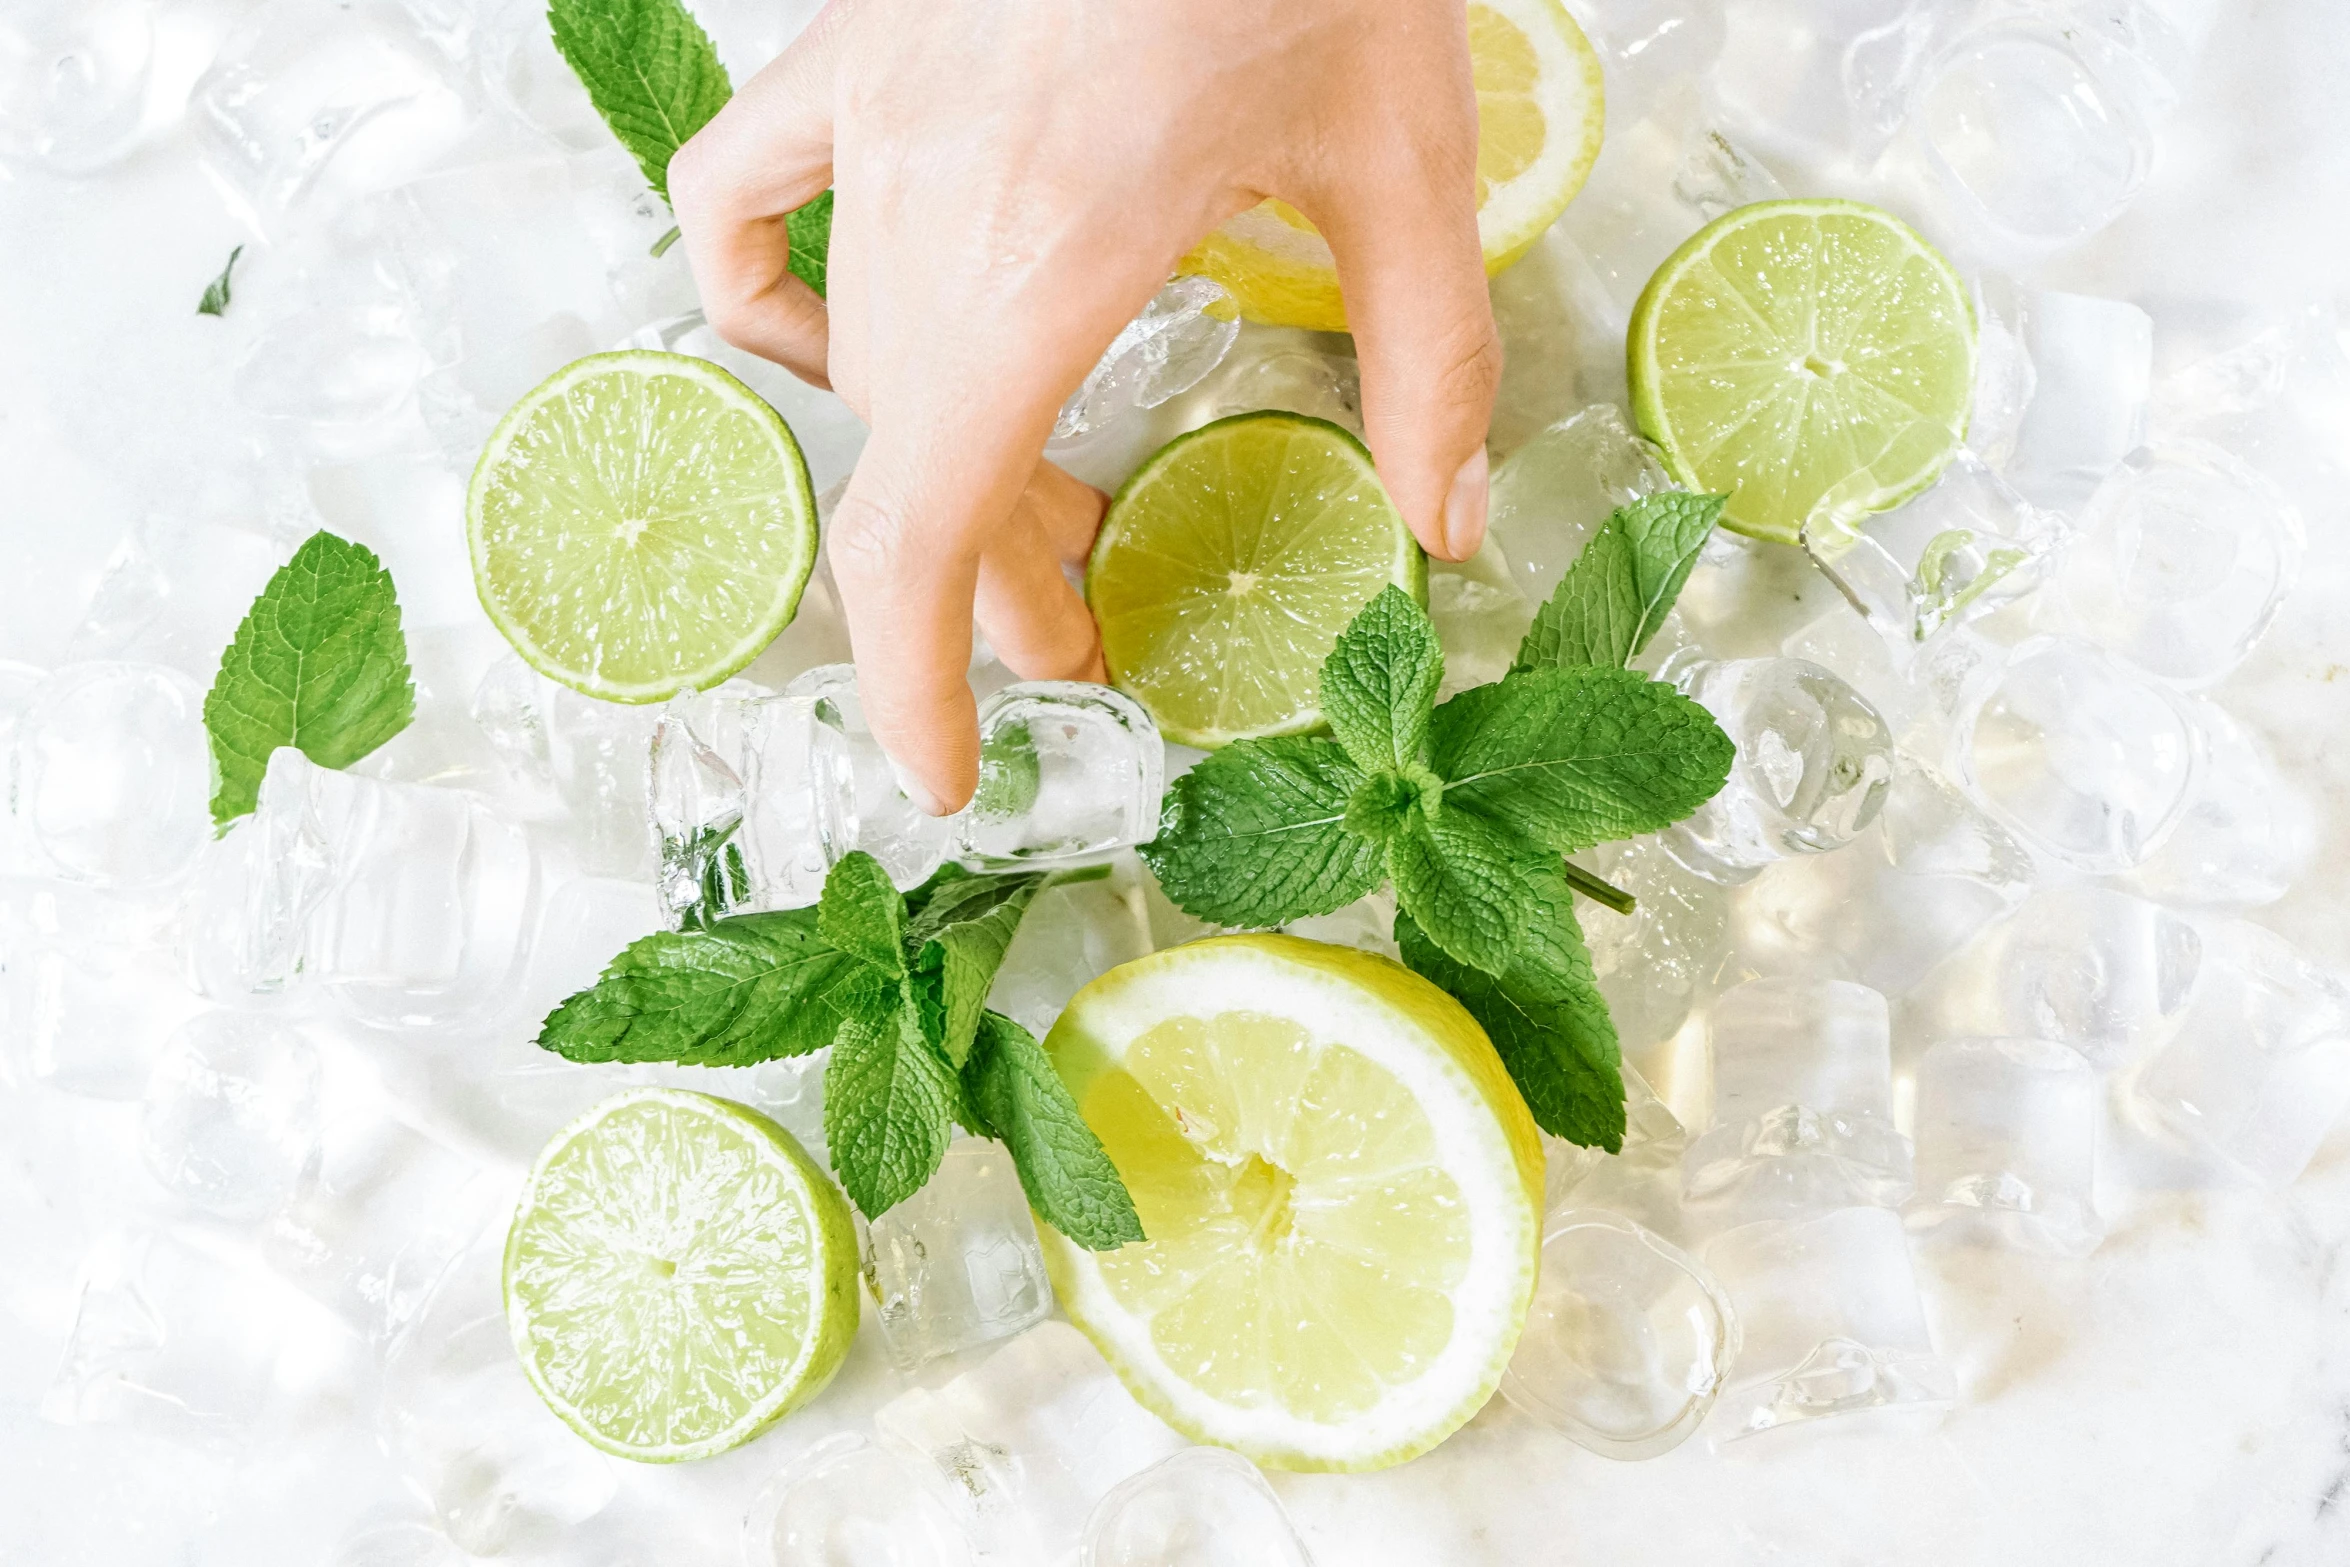 two hands holding a cocktail glass with ice and lime slices on ice